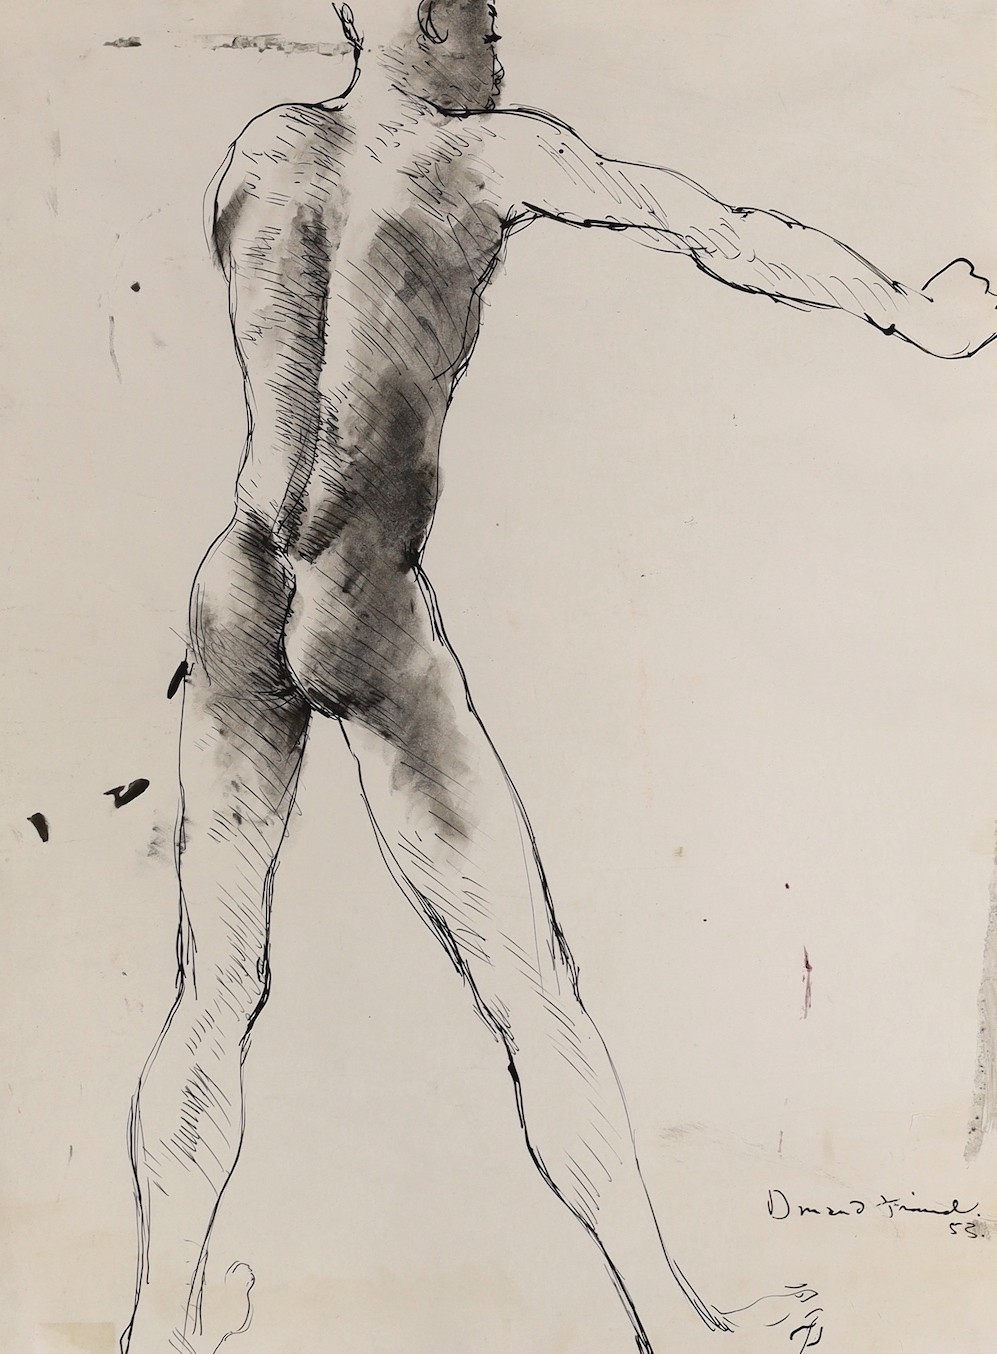 Donald Friend (Australian, 1917-1989), ink and wash, Study of Omu 1953, signed and dated '53, Bridget McDonnel Gallery label verso, 55 x 40cm